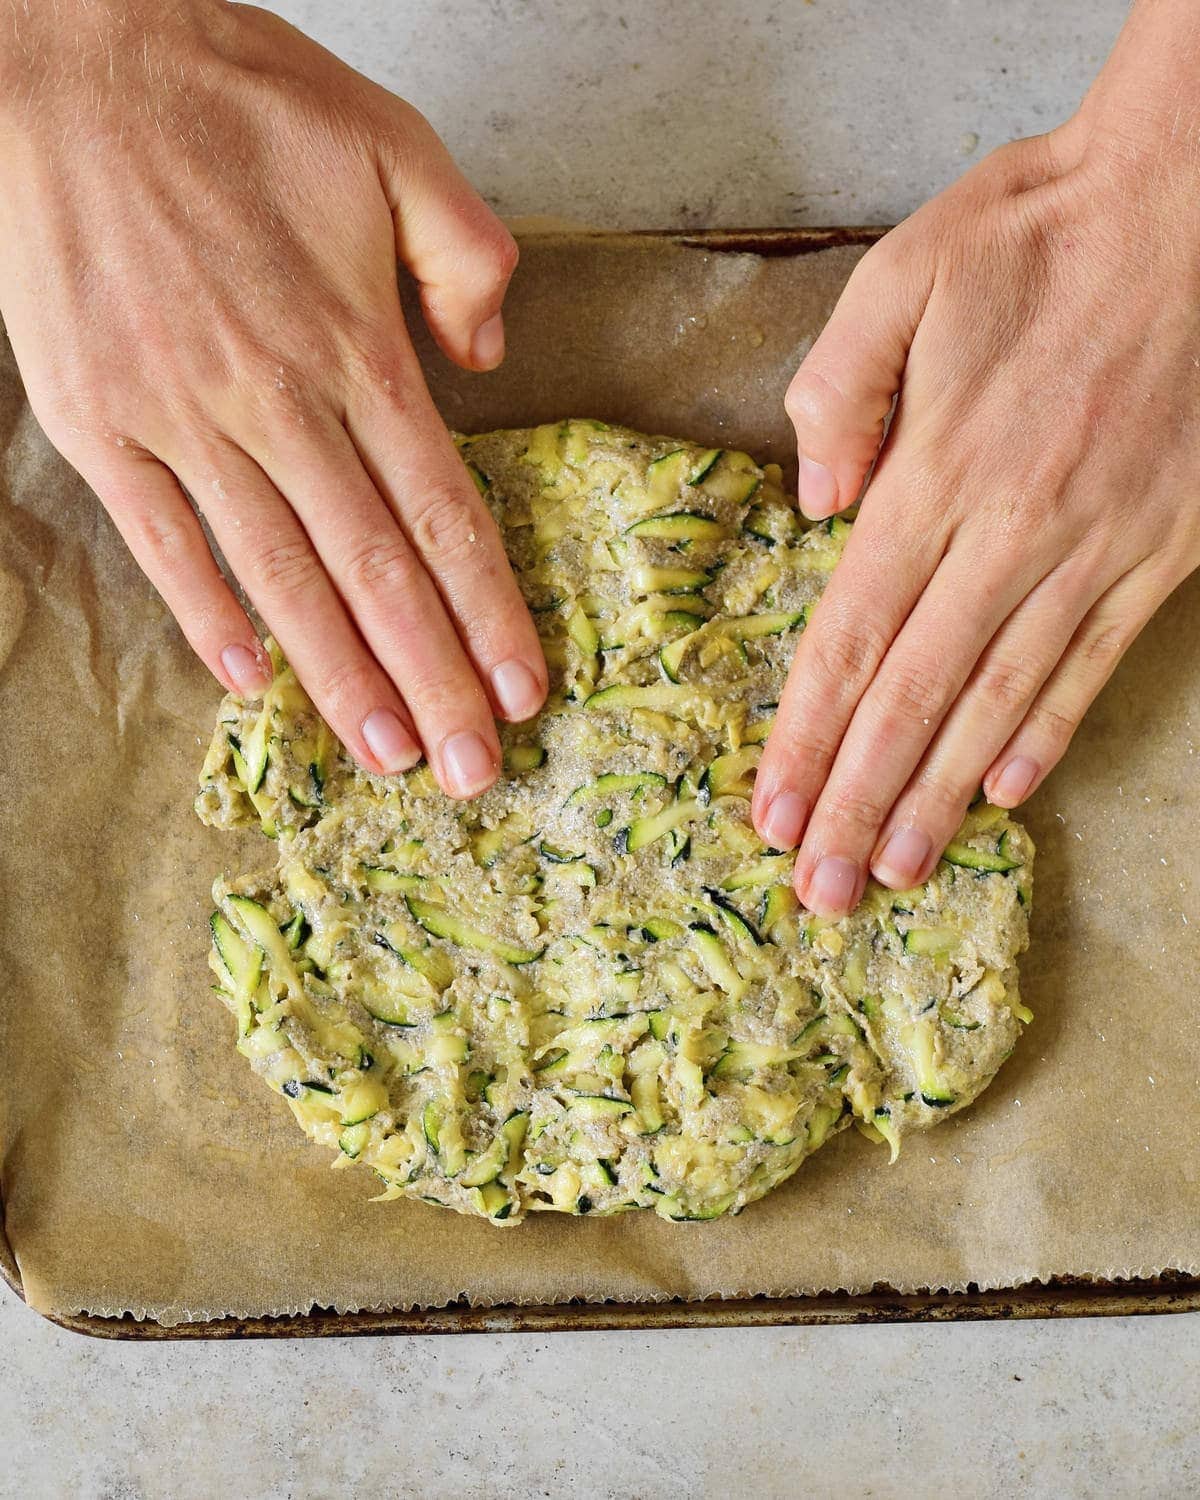 hands spread zucchini pizza crust on oiled parchment paper